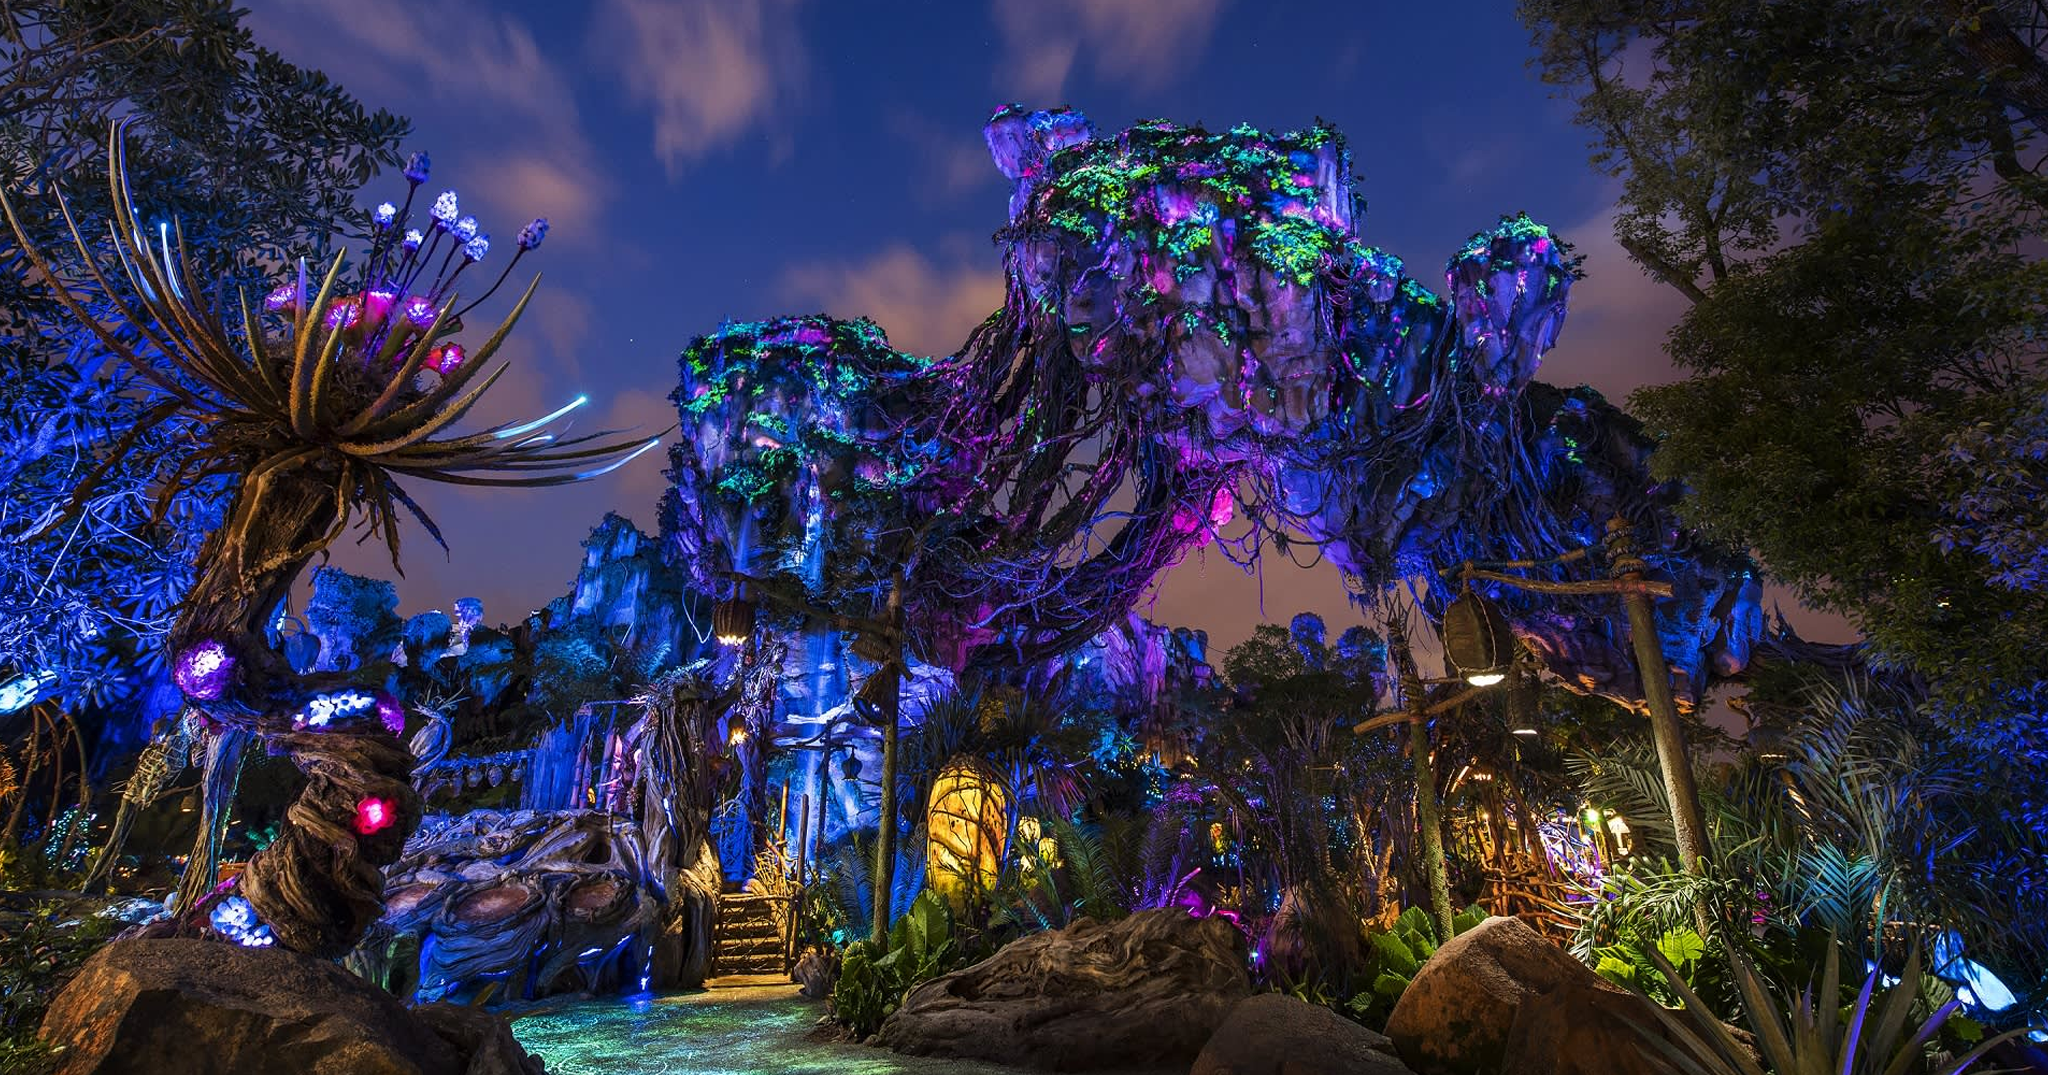 A Version of ‘Pandora – The World of Avatar’ could be coming to Disneyland Paris!